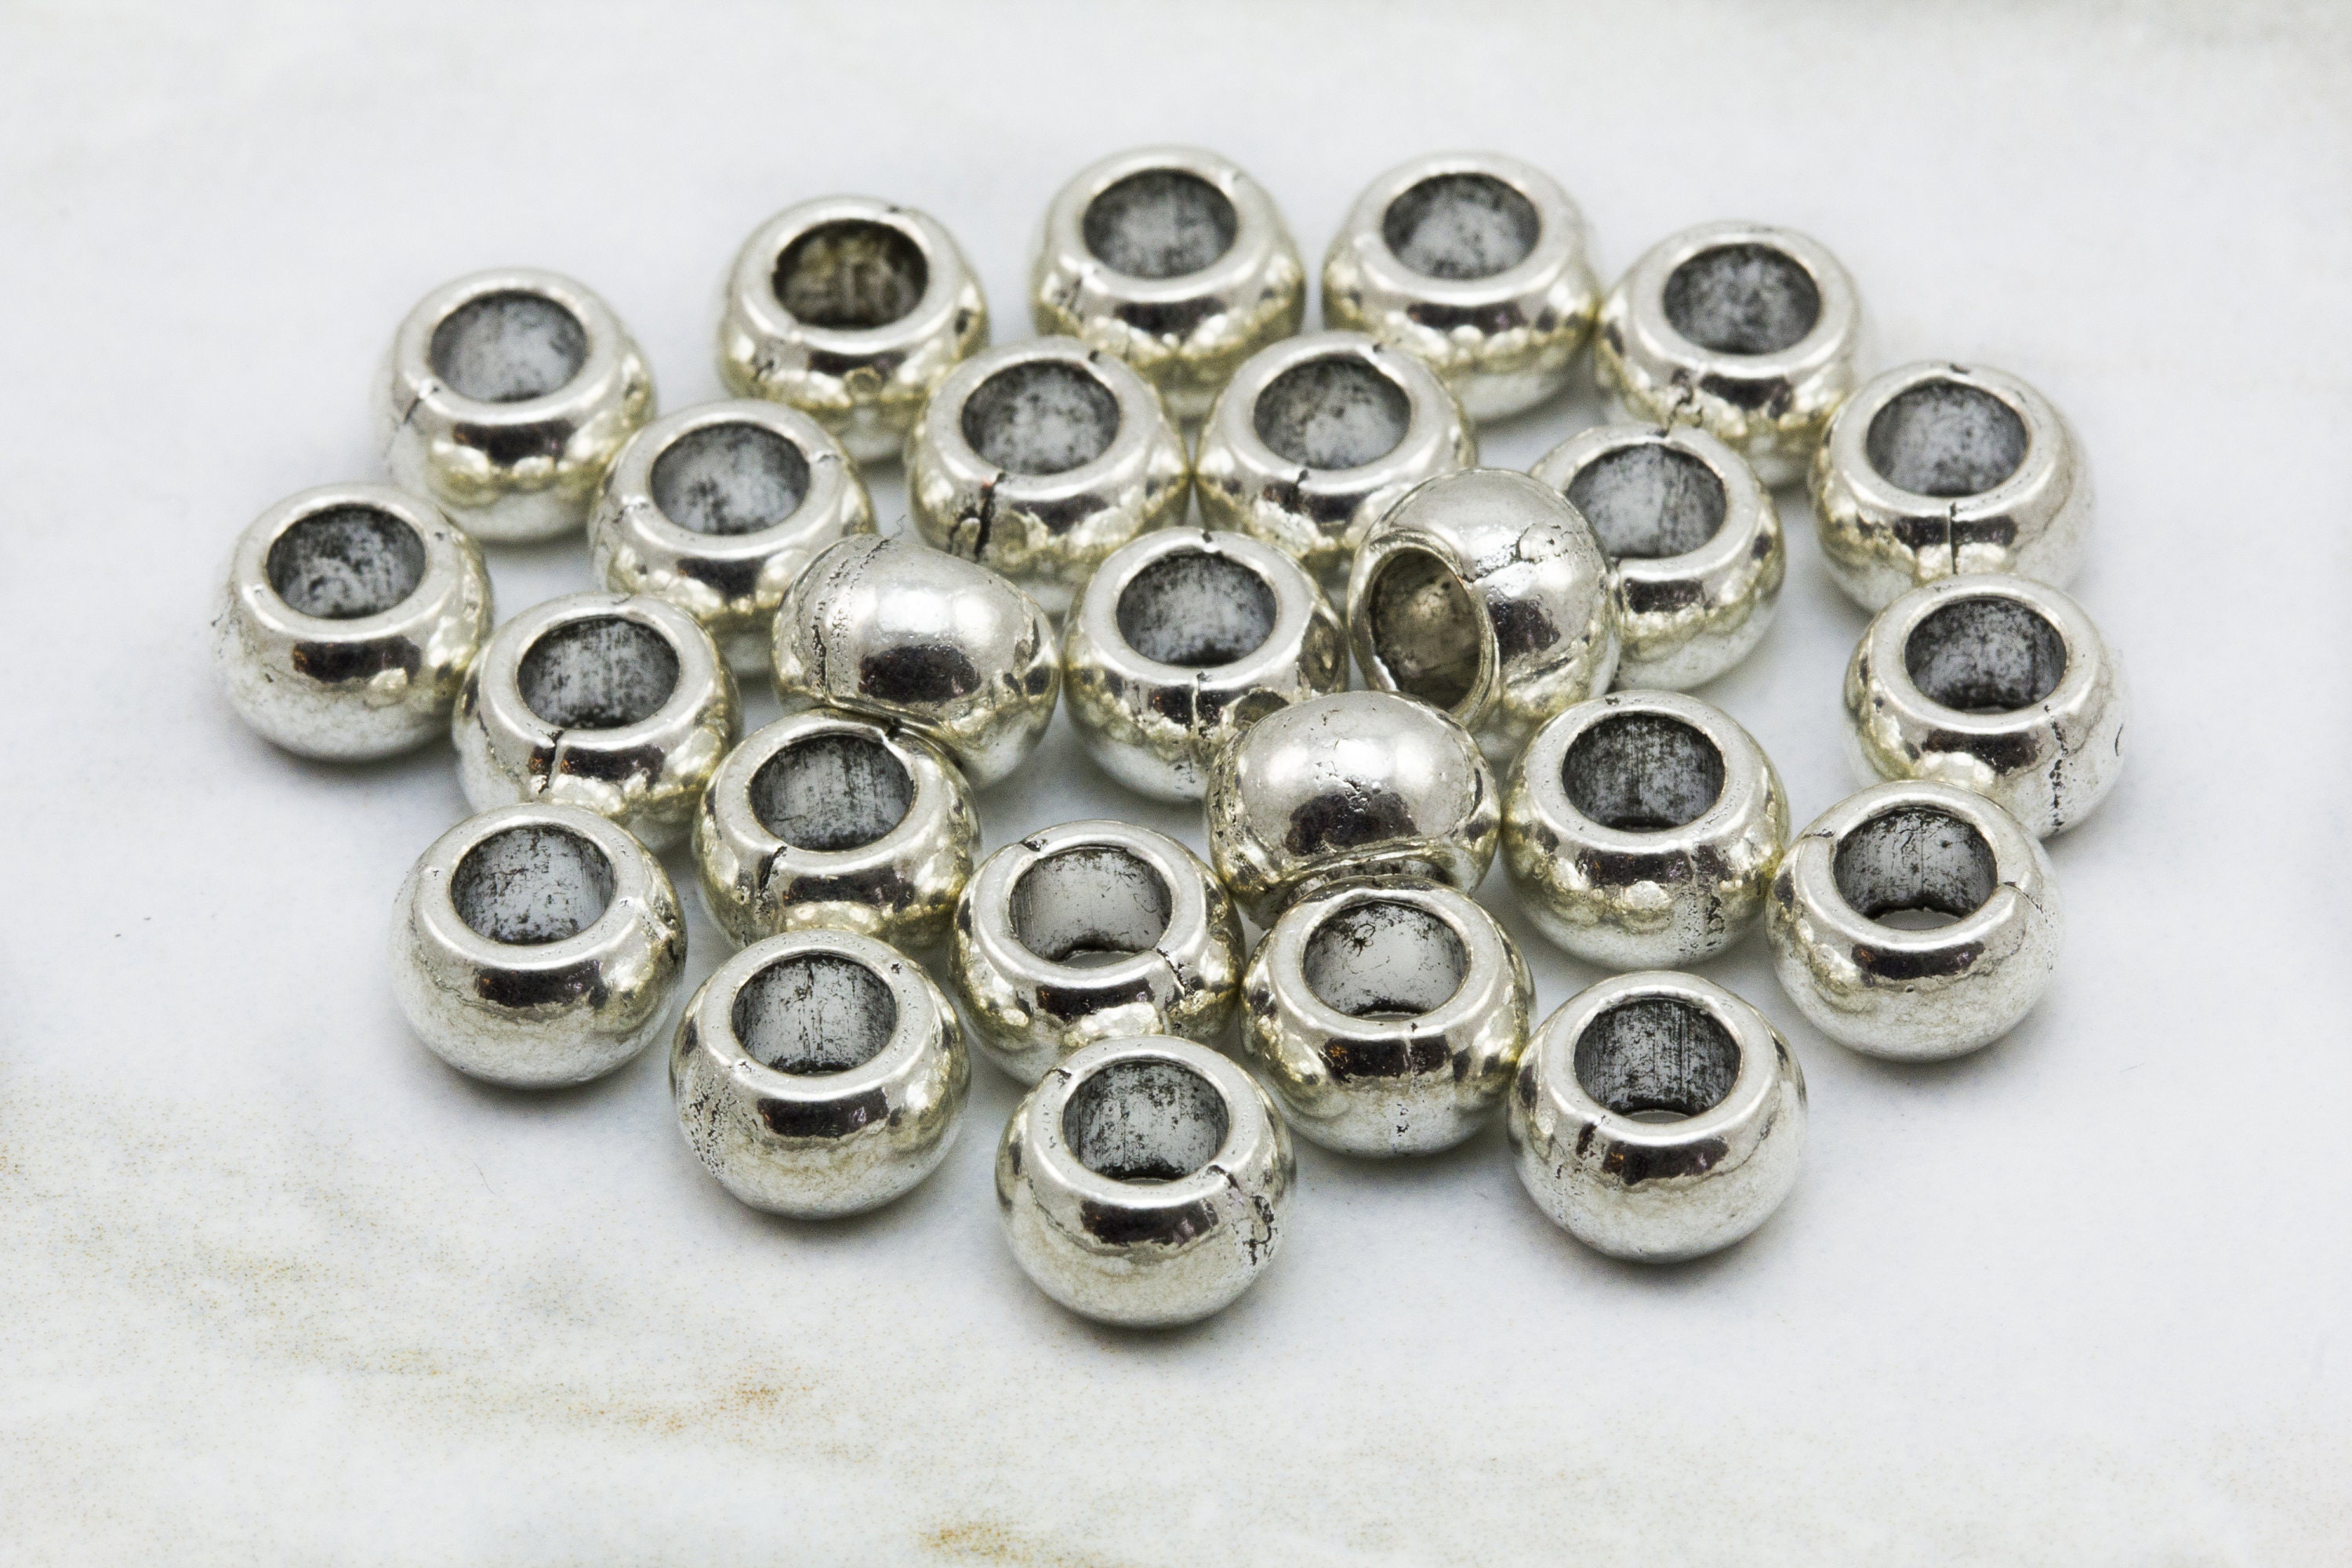 4mm Rondelle Spacer Beads / MB-004